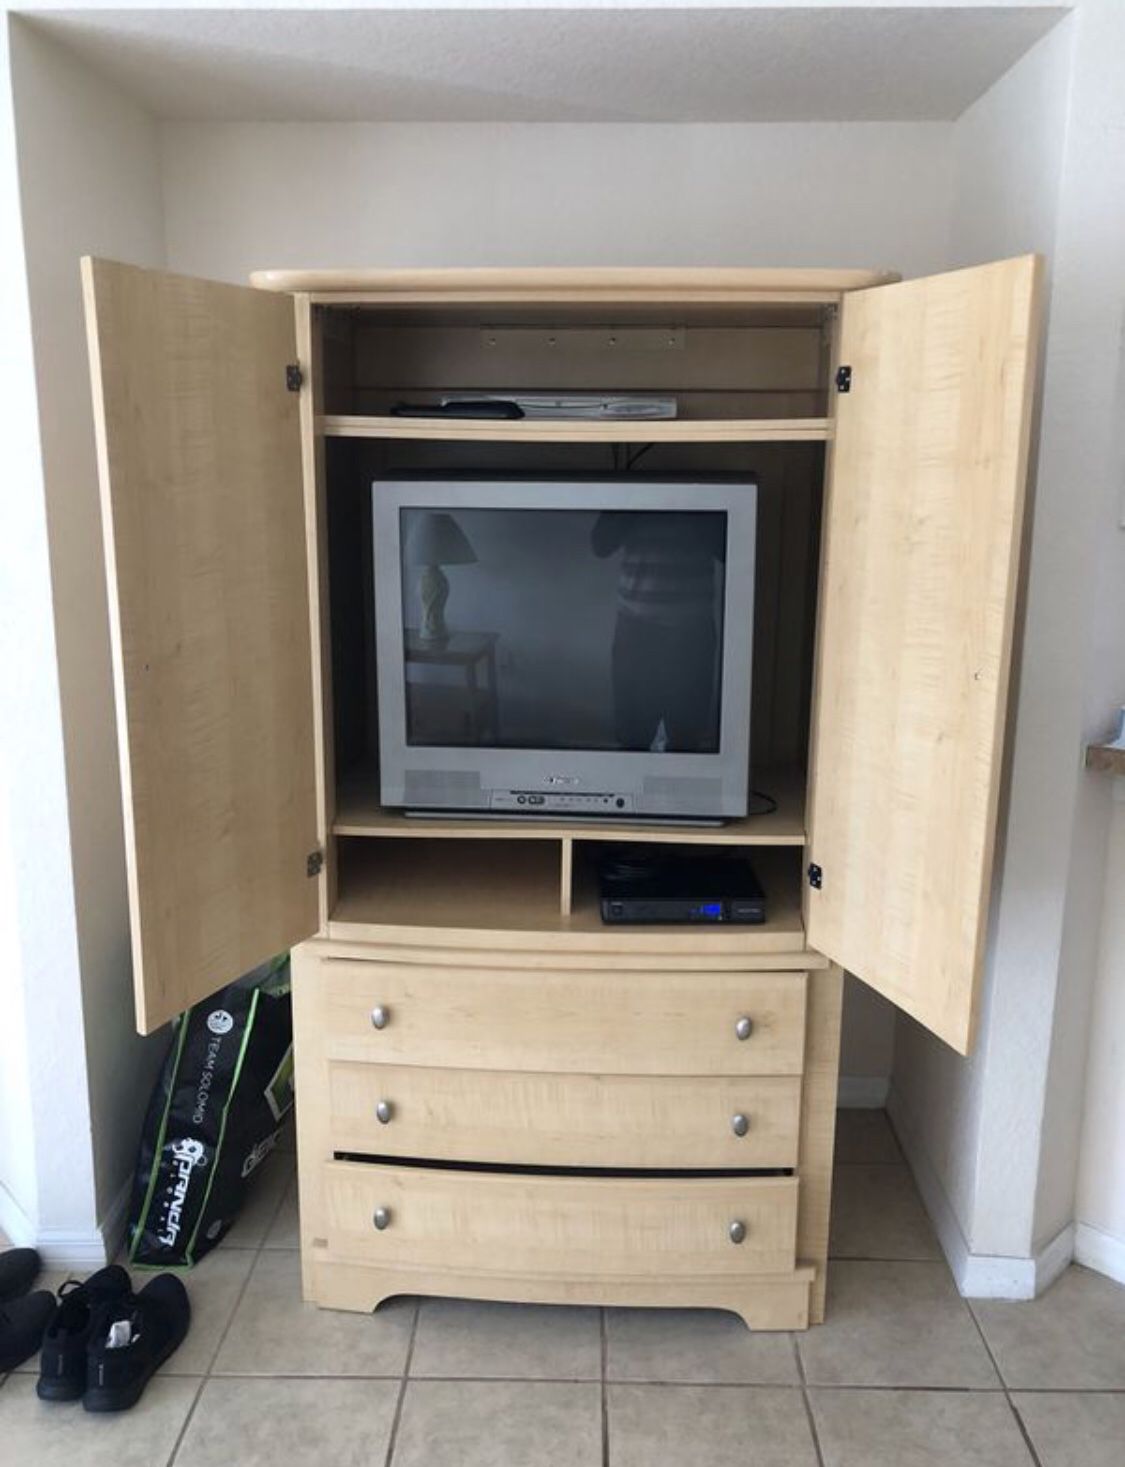 Comes with tv and dvd player